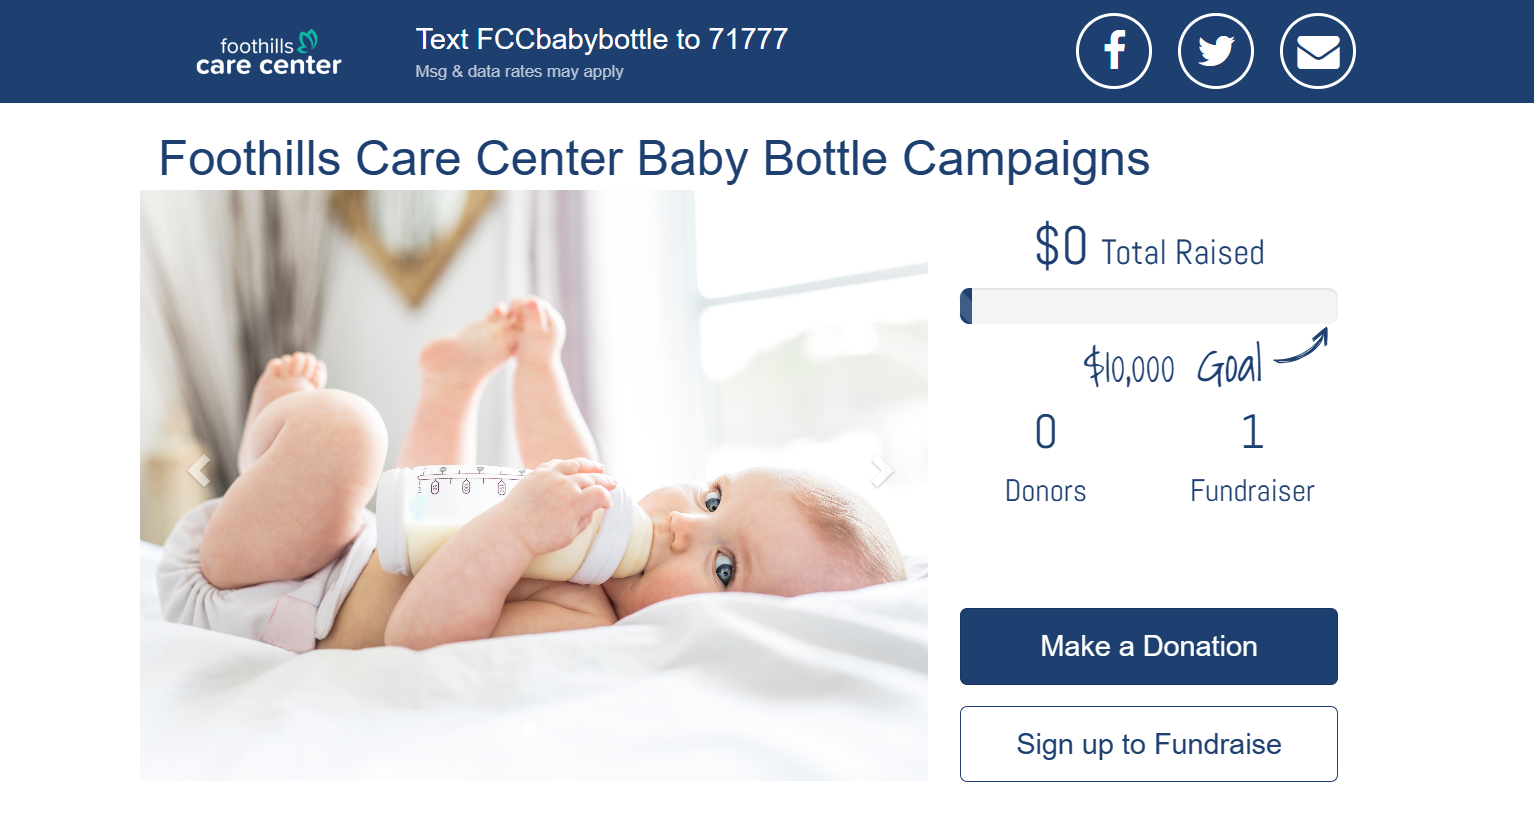 Baby Bottle Campaign